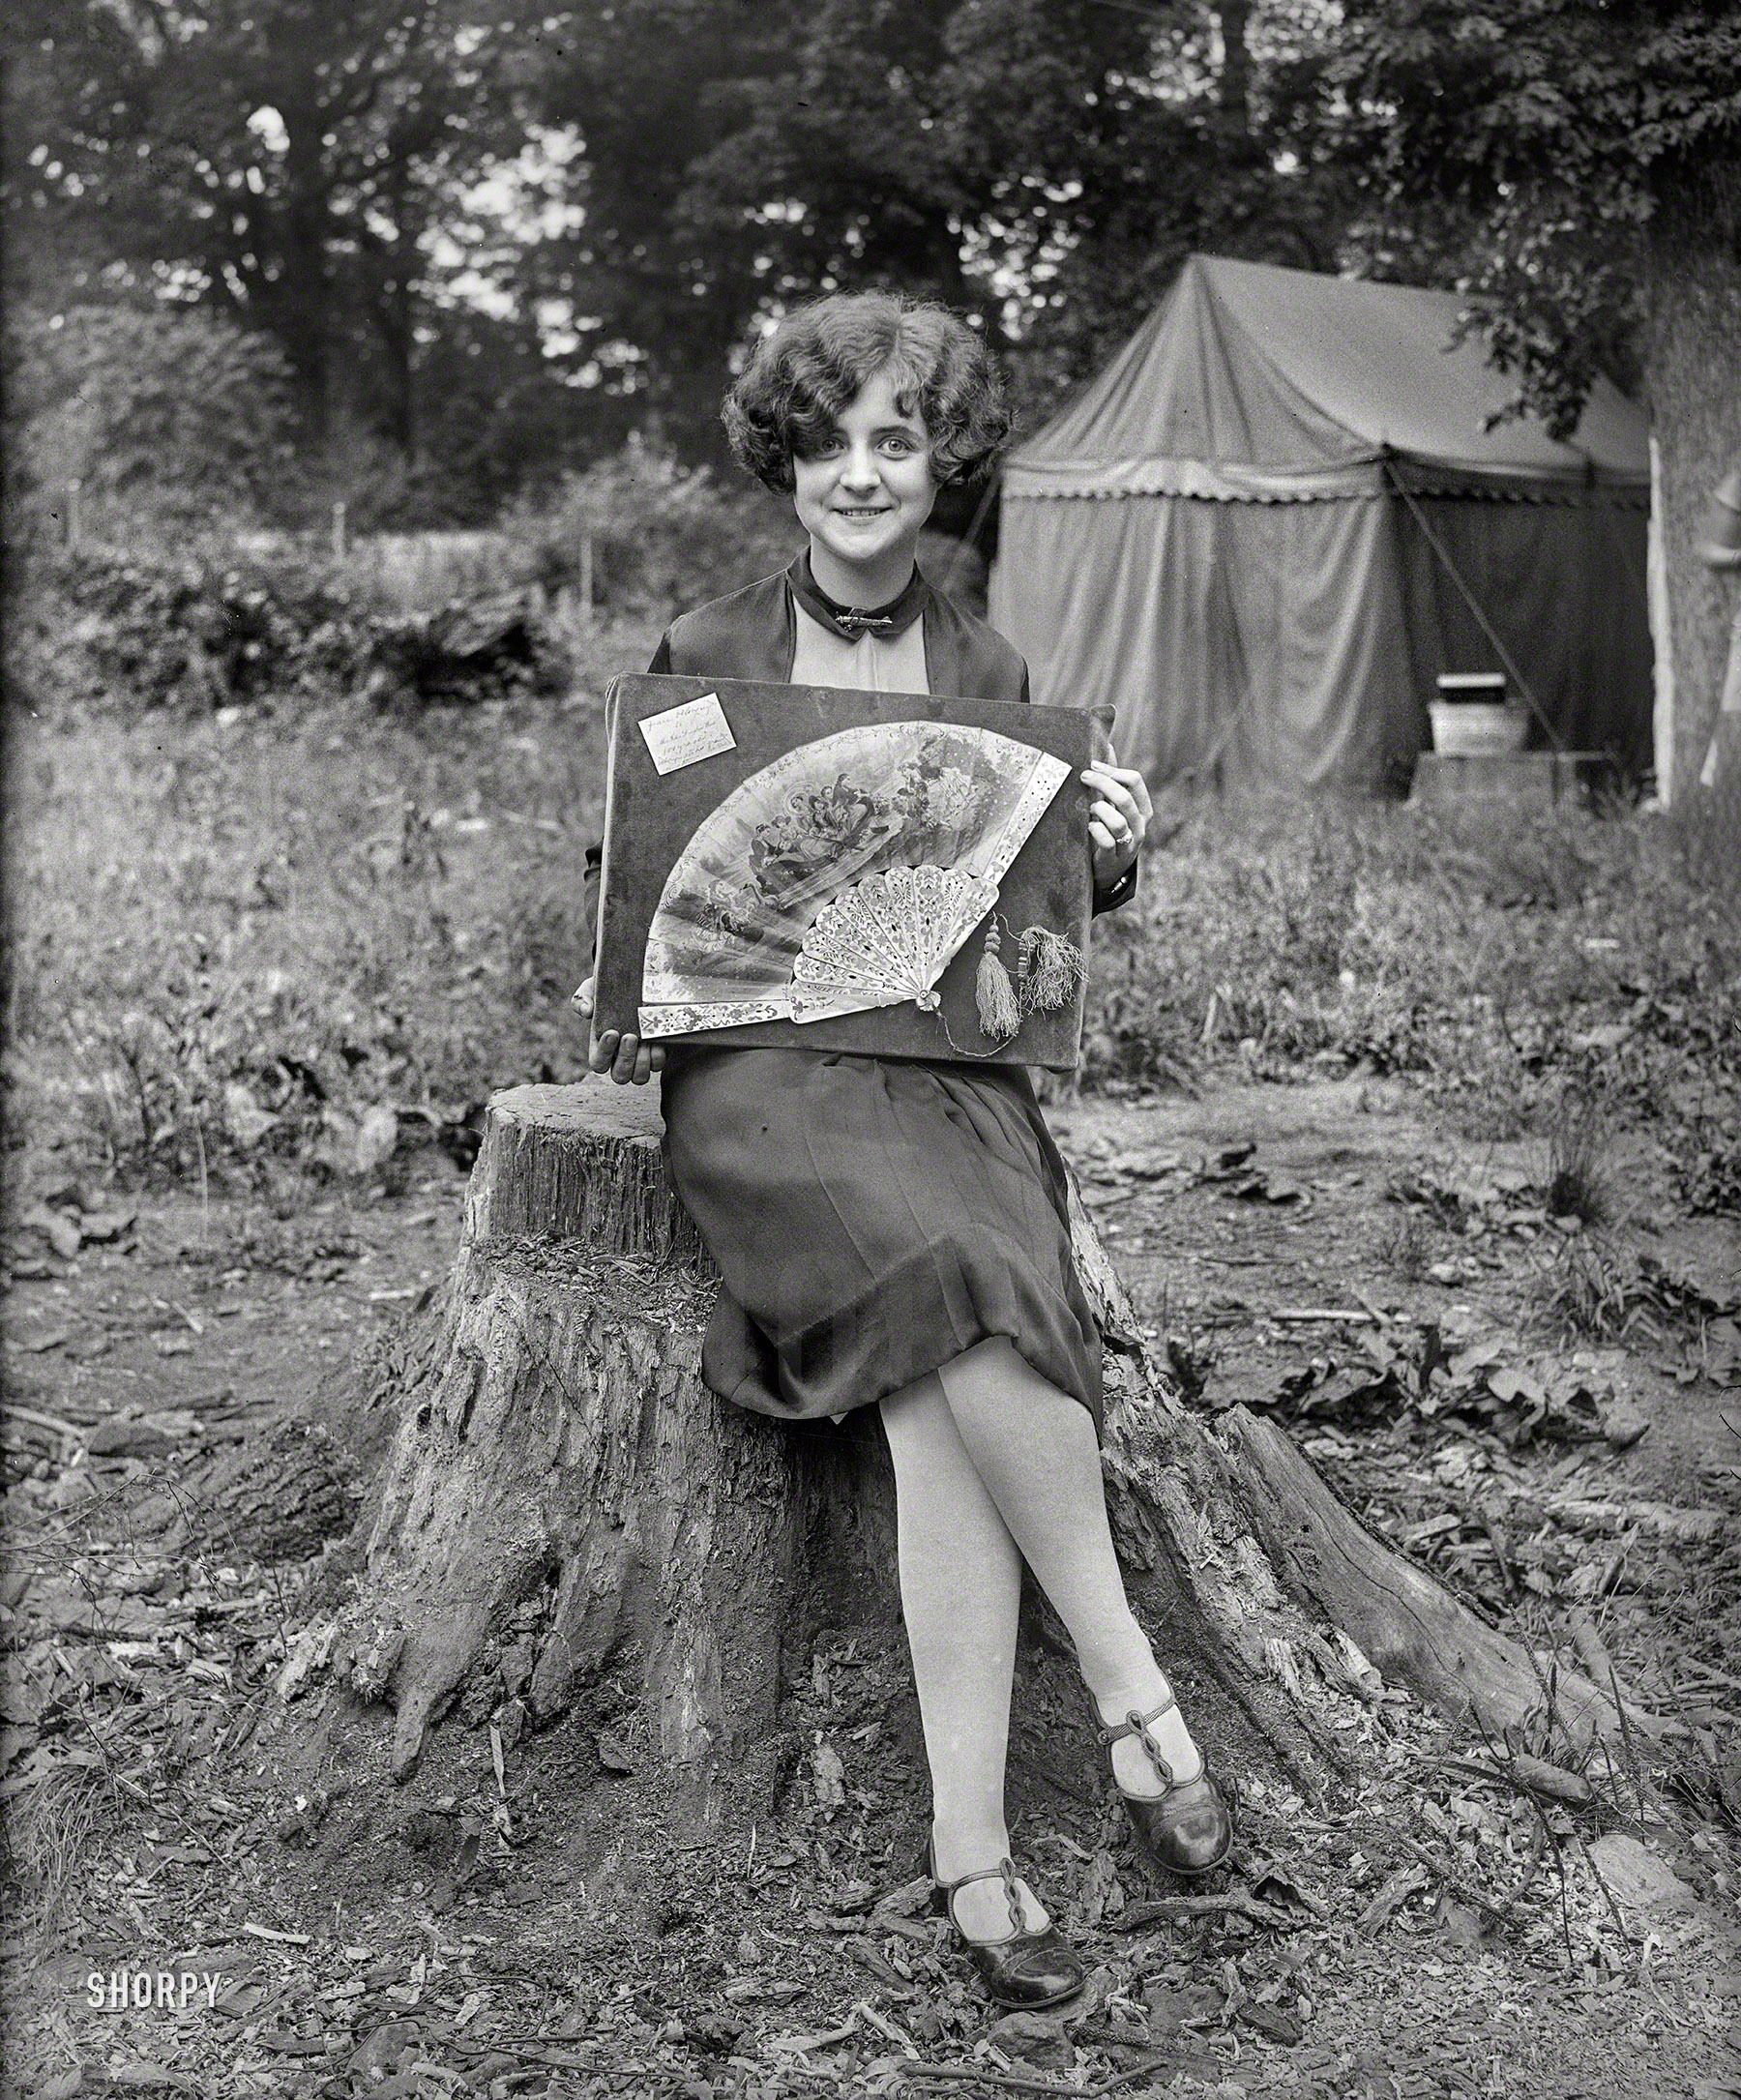 Washington, D.C., or vicinity, 1927. "Woman at campsite with fan display." The card enlarged here. Harris & Ewing Collection glass negative. View full size.